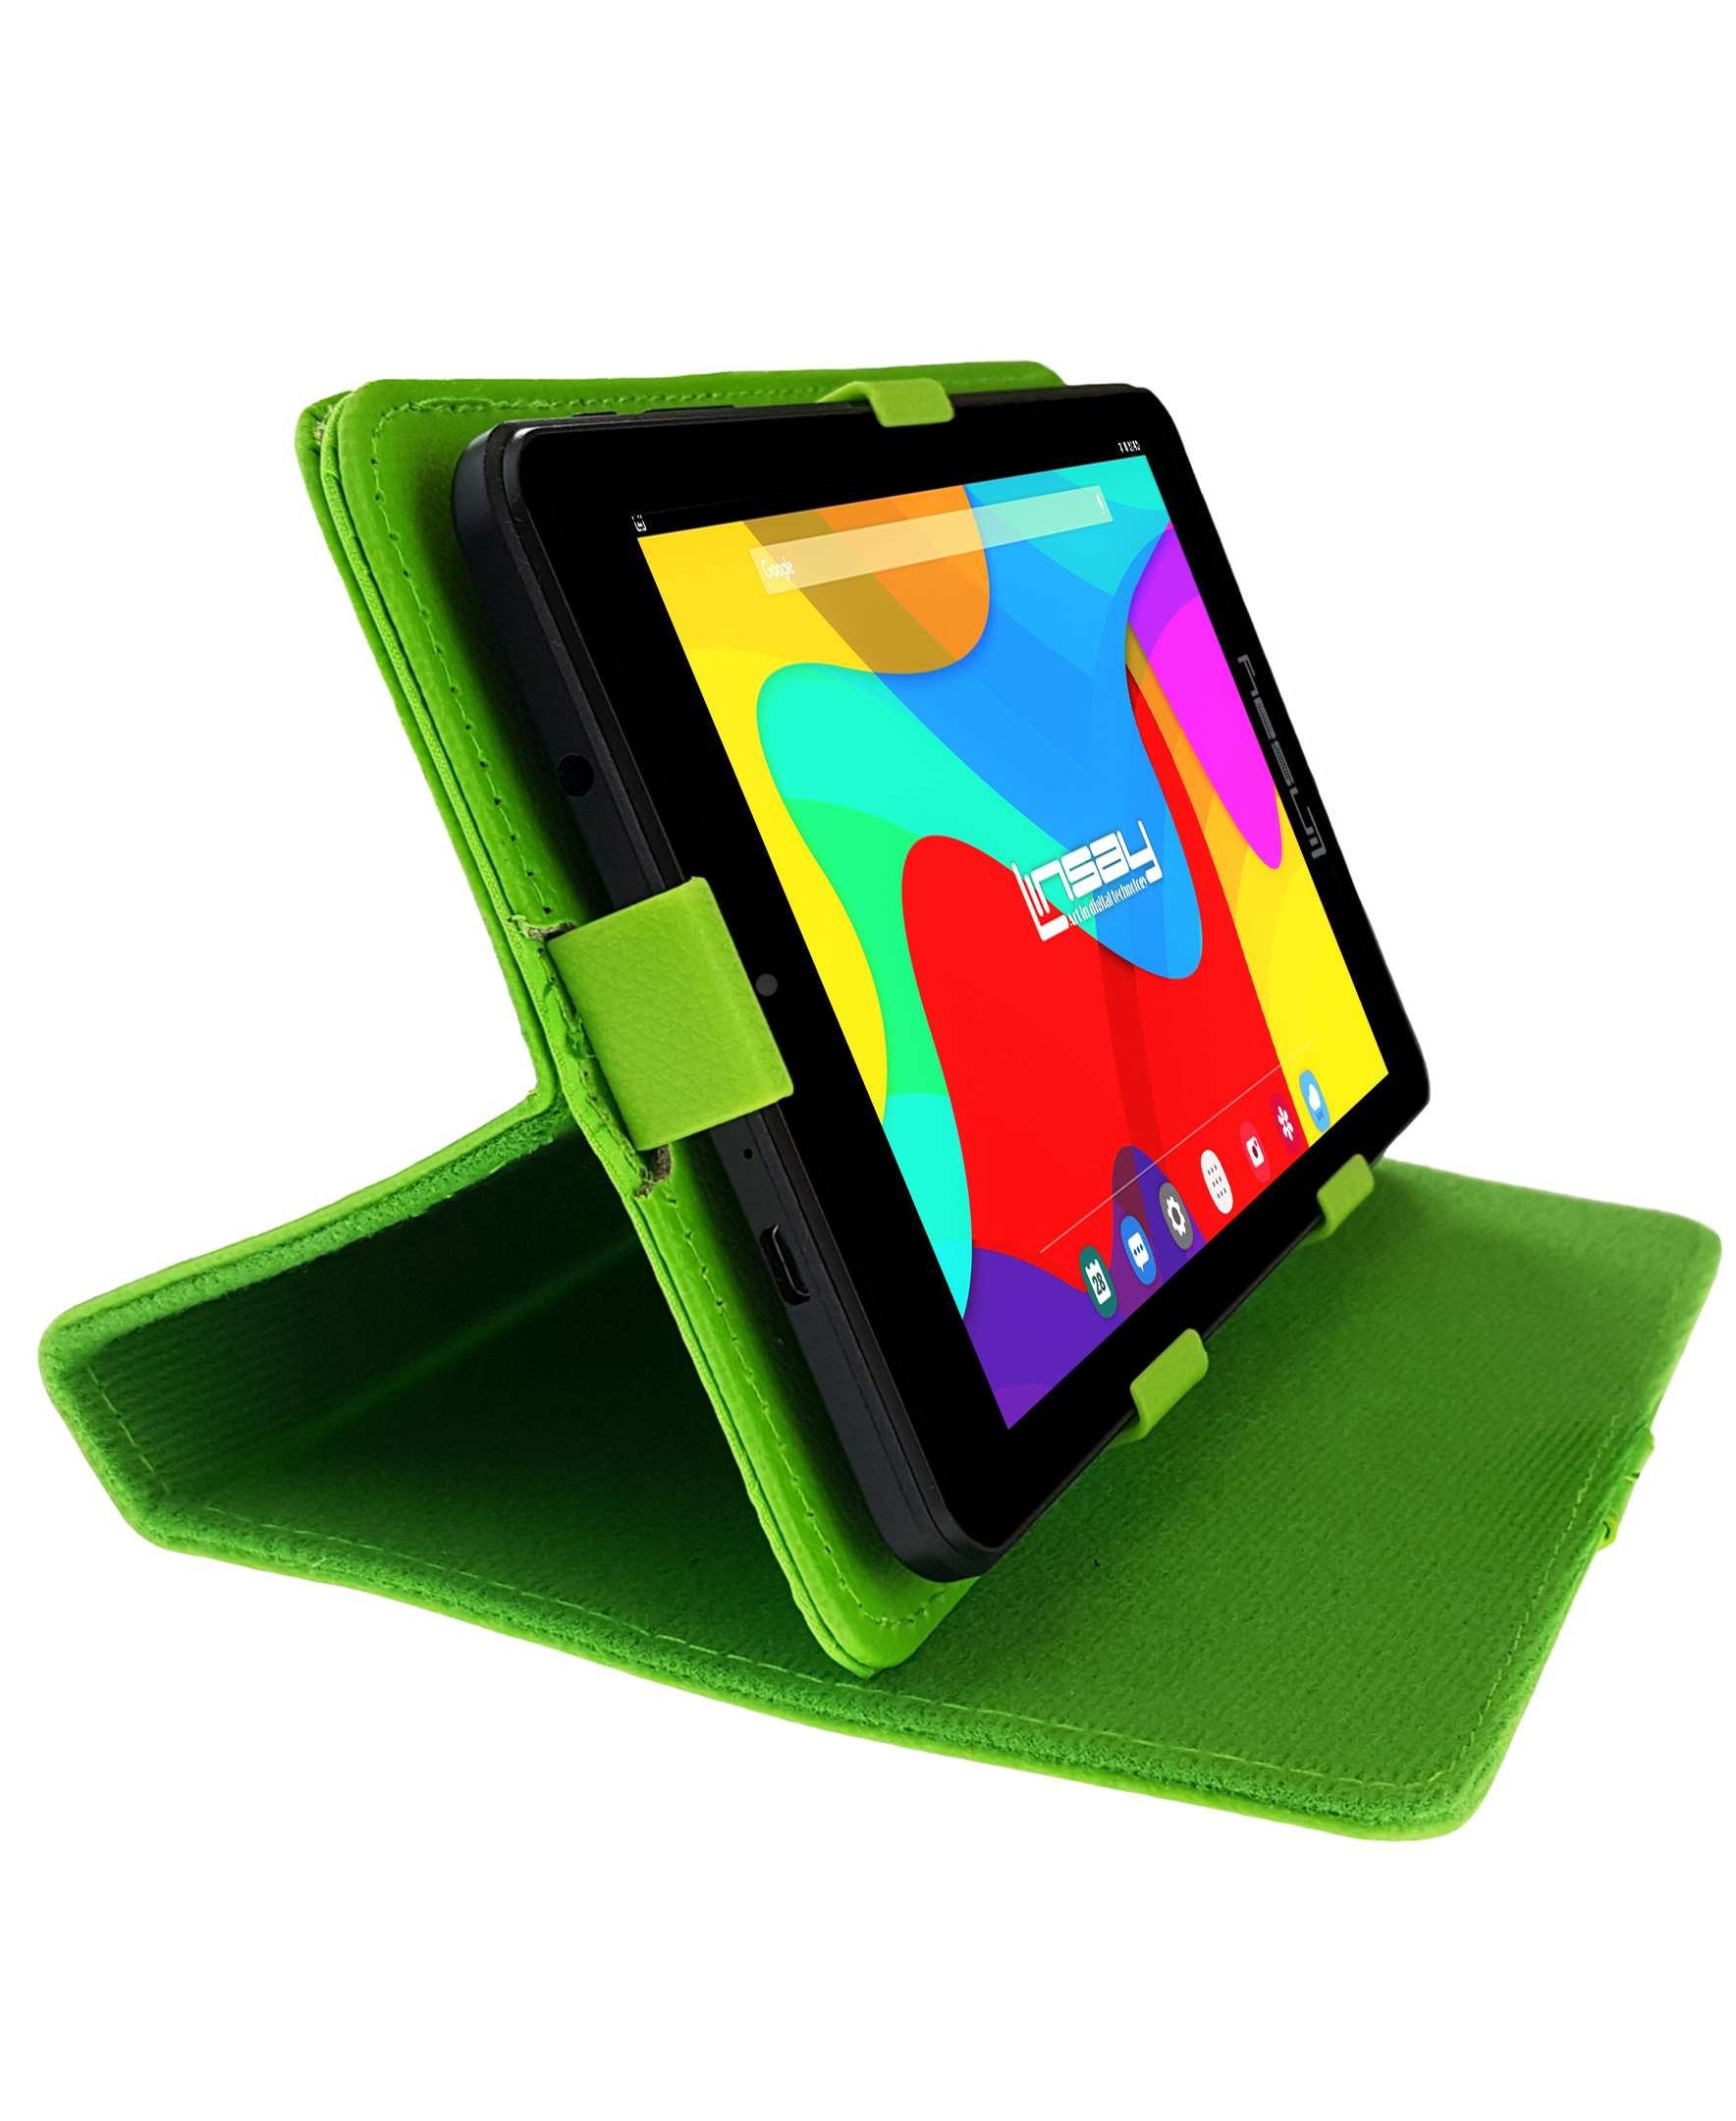 Linsay 7" 2GB RAM 32GB Android 12 Wi-Fi Tablet with Case Green, Pop Holder and Pen Stylus - image 3 of 3